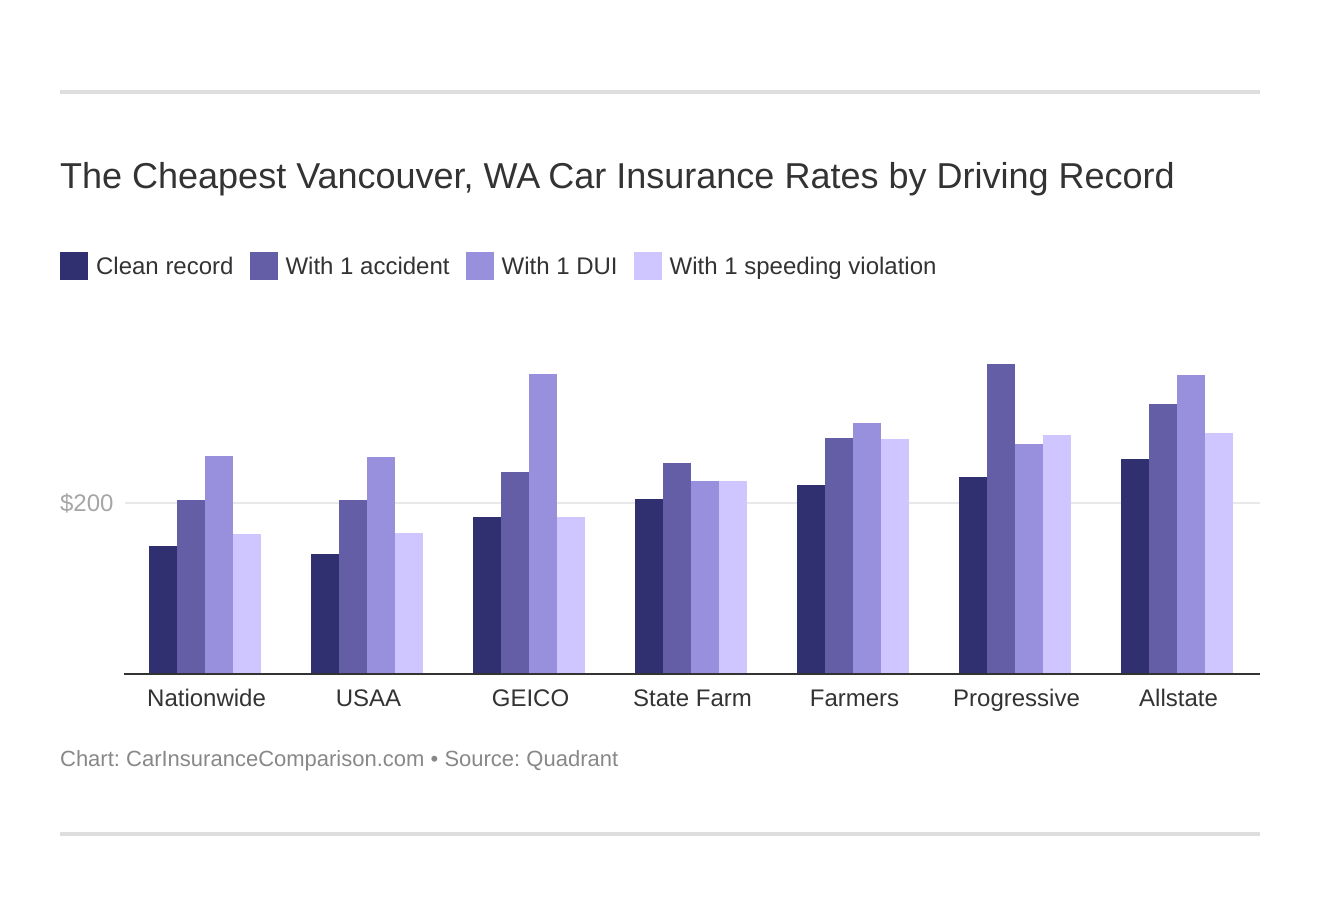 The Cheapest Vancouver, WA Car Insurance Rates by Driving Record